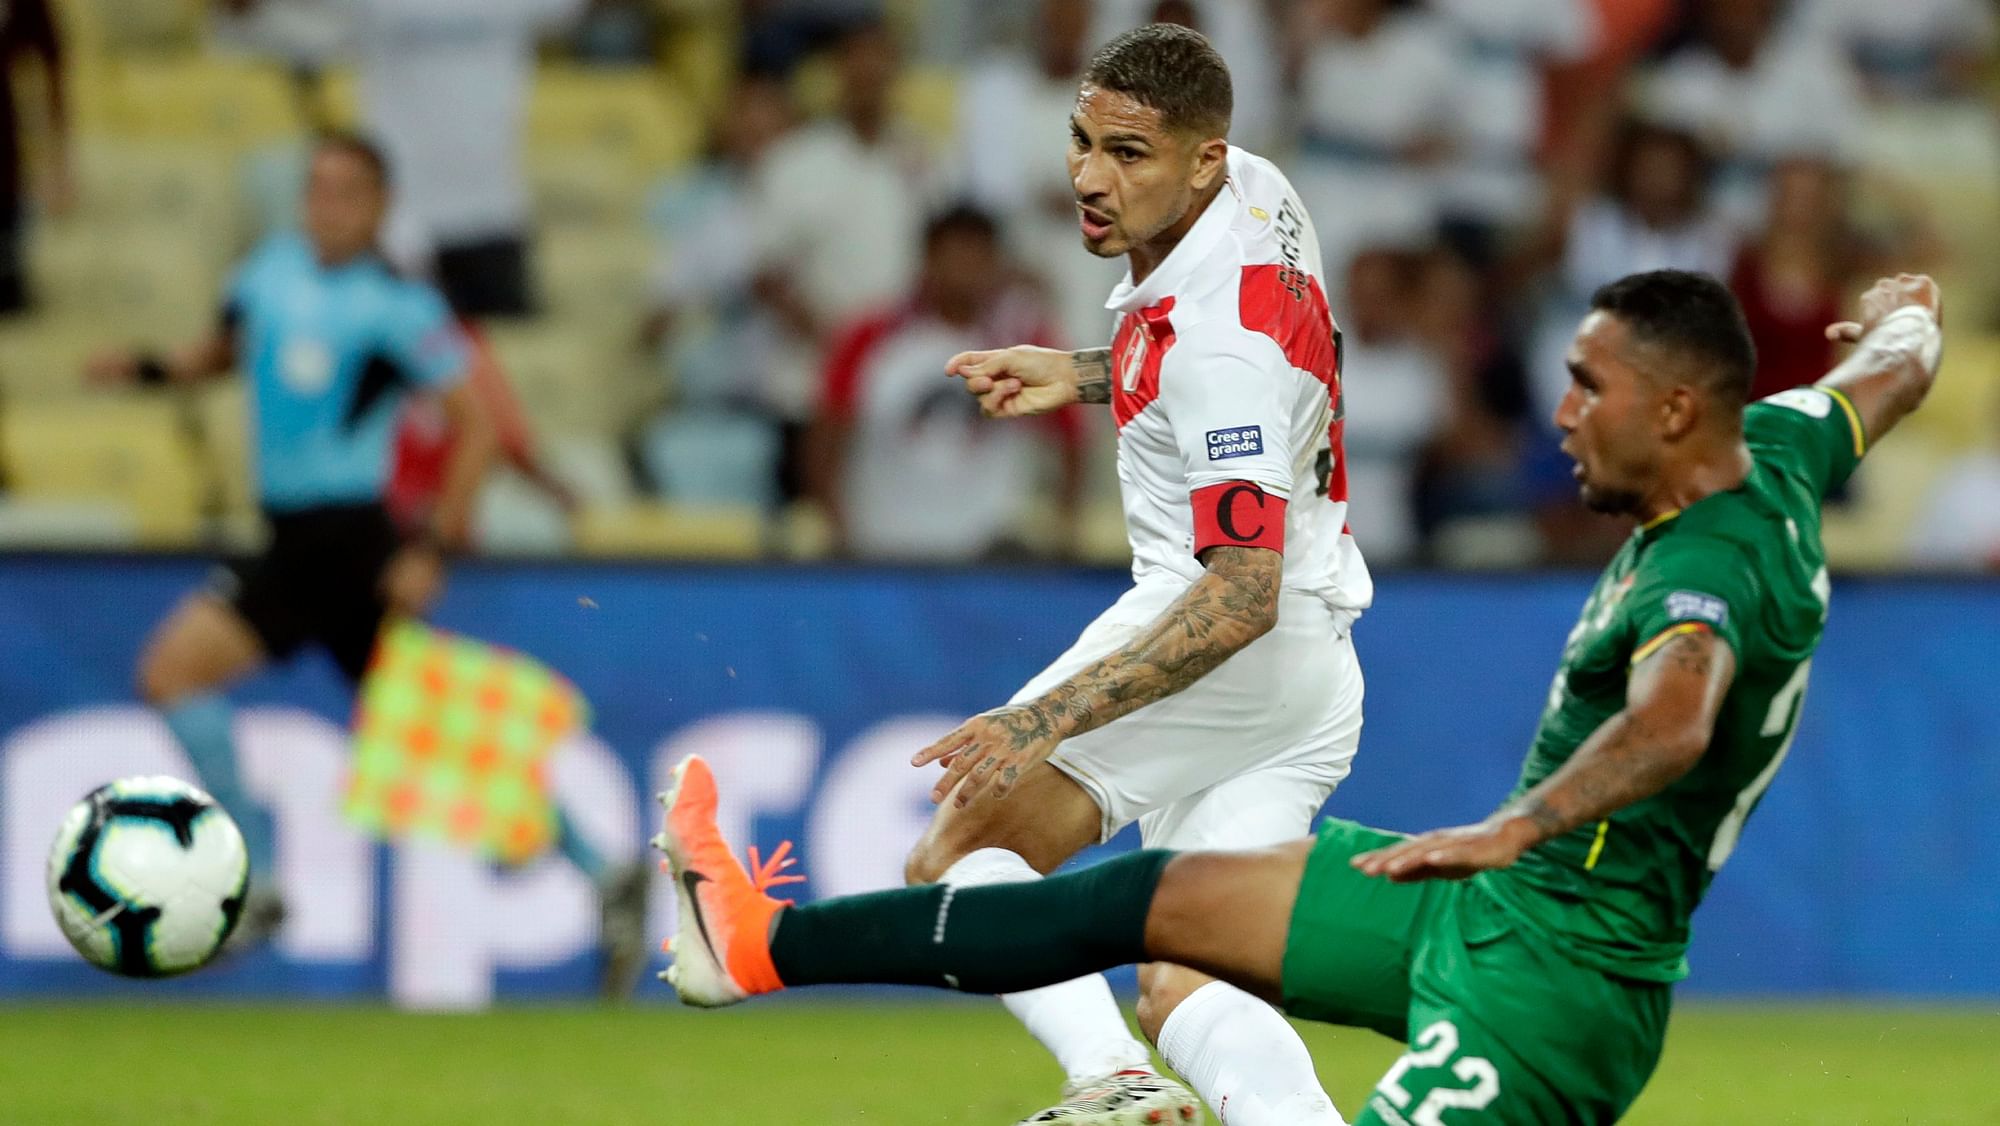 Guerrero strike the ball past Bolivia’s Adrian Jusino, to score his team’s equalizer during a Copa America.